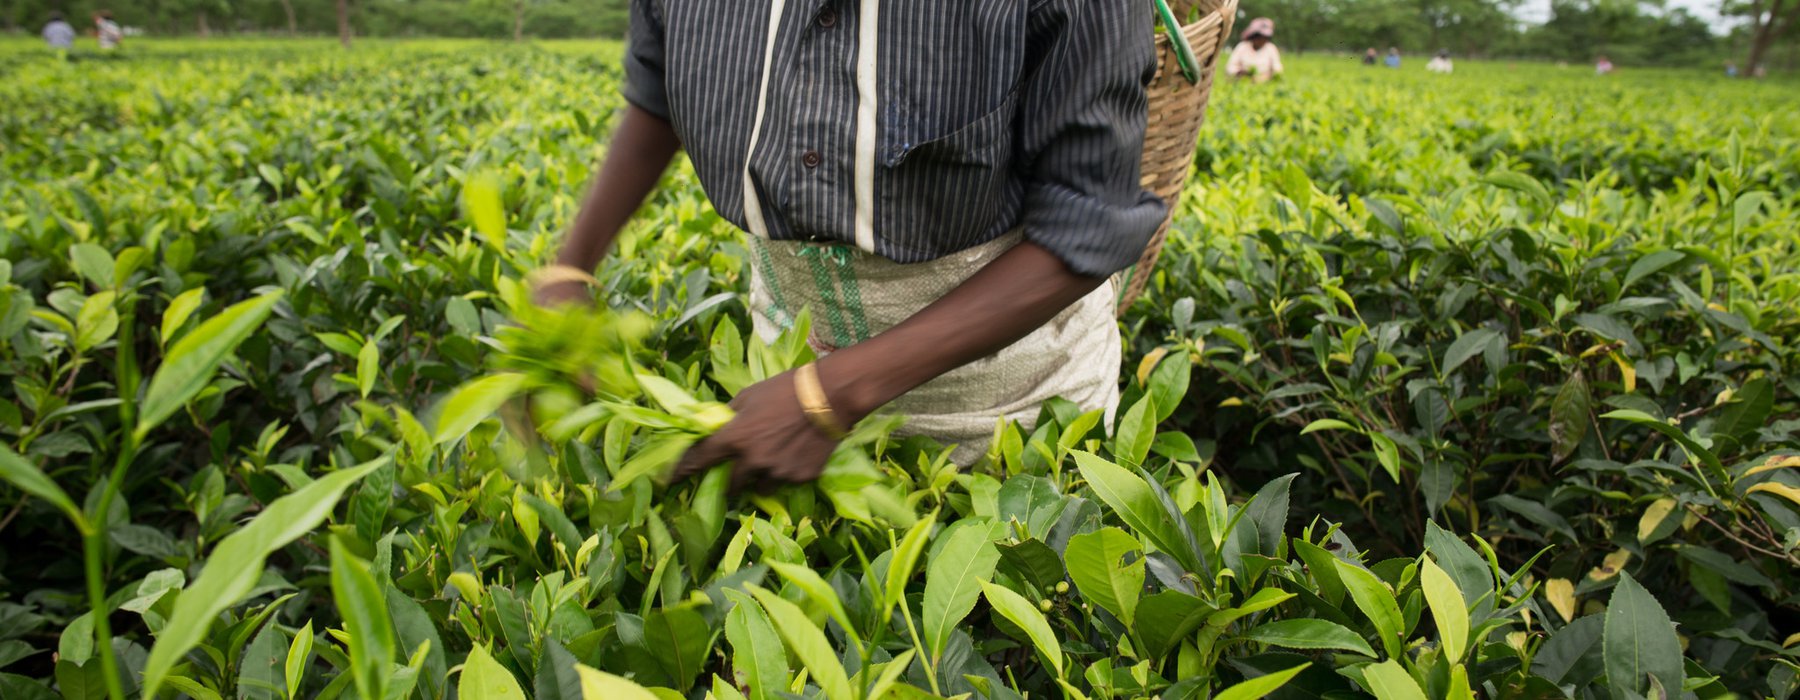 A woman plucking tea leaves in the garden